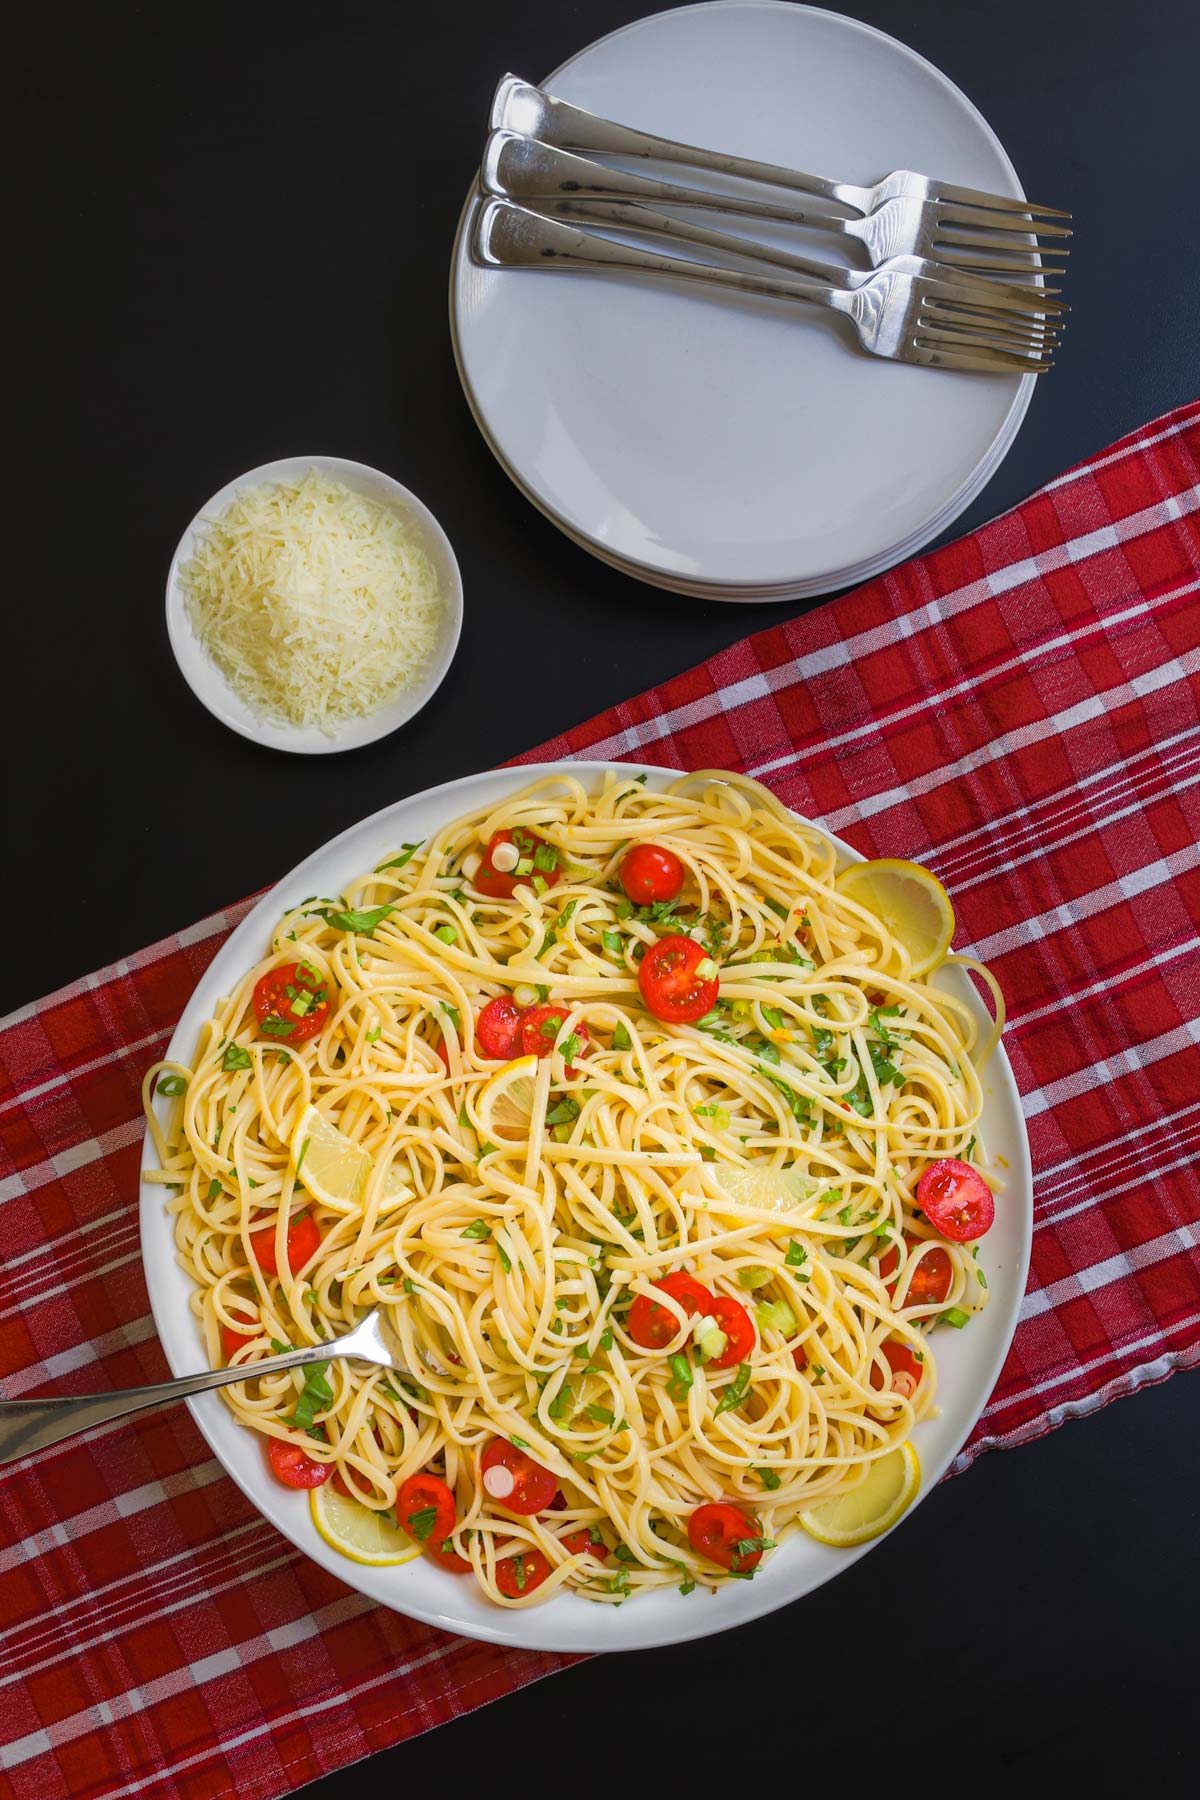 assembled pasta with lemon next to stack of plates and small bowl of cheese.